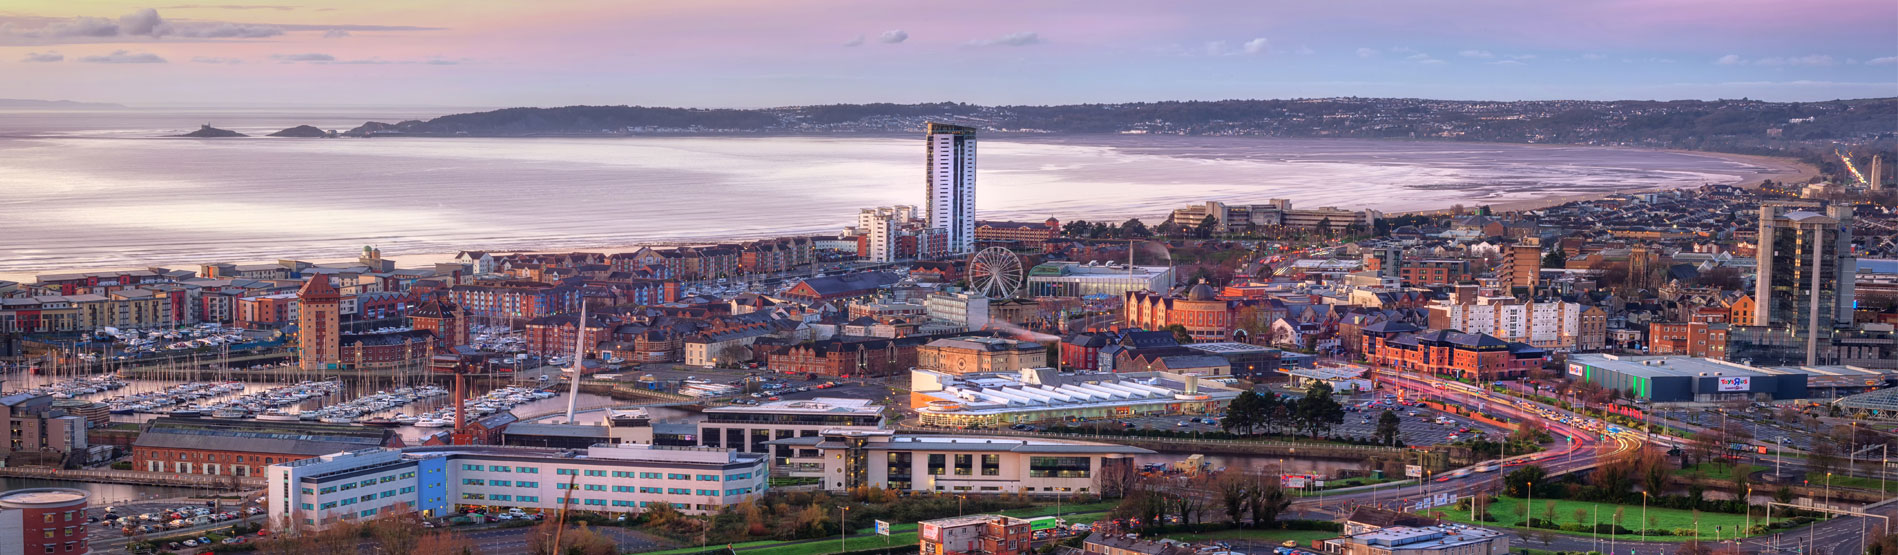 Swansea Bay City Region Innovation Ecosystem: Creating the conditions for ideas to thrive in South West Wales